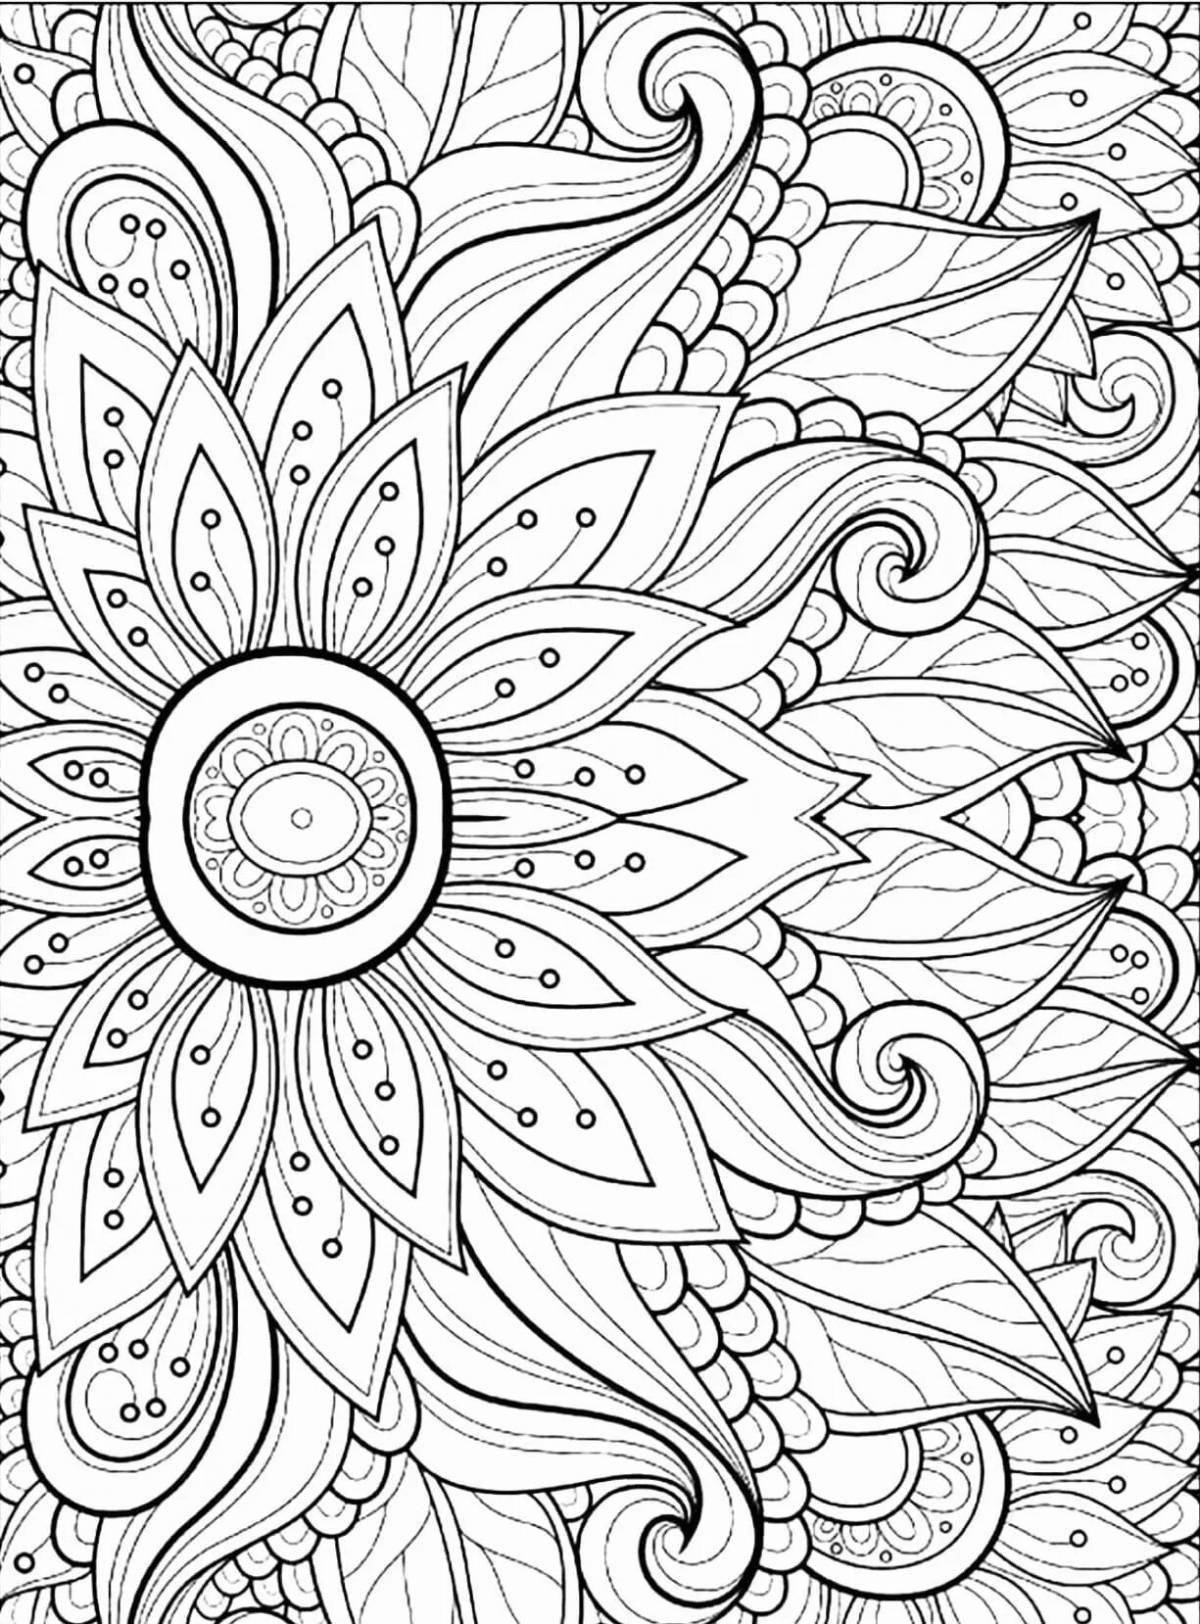 Harmonious psychological coloring book for adults